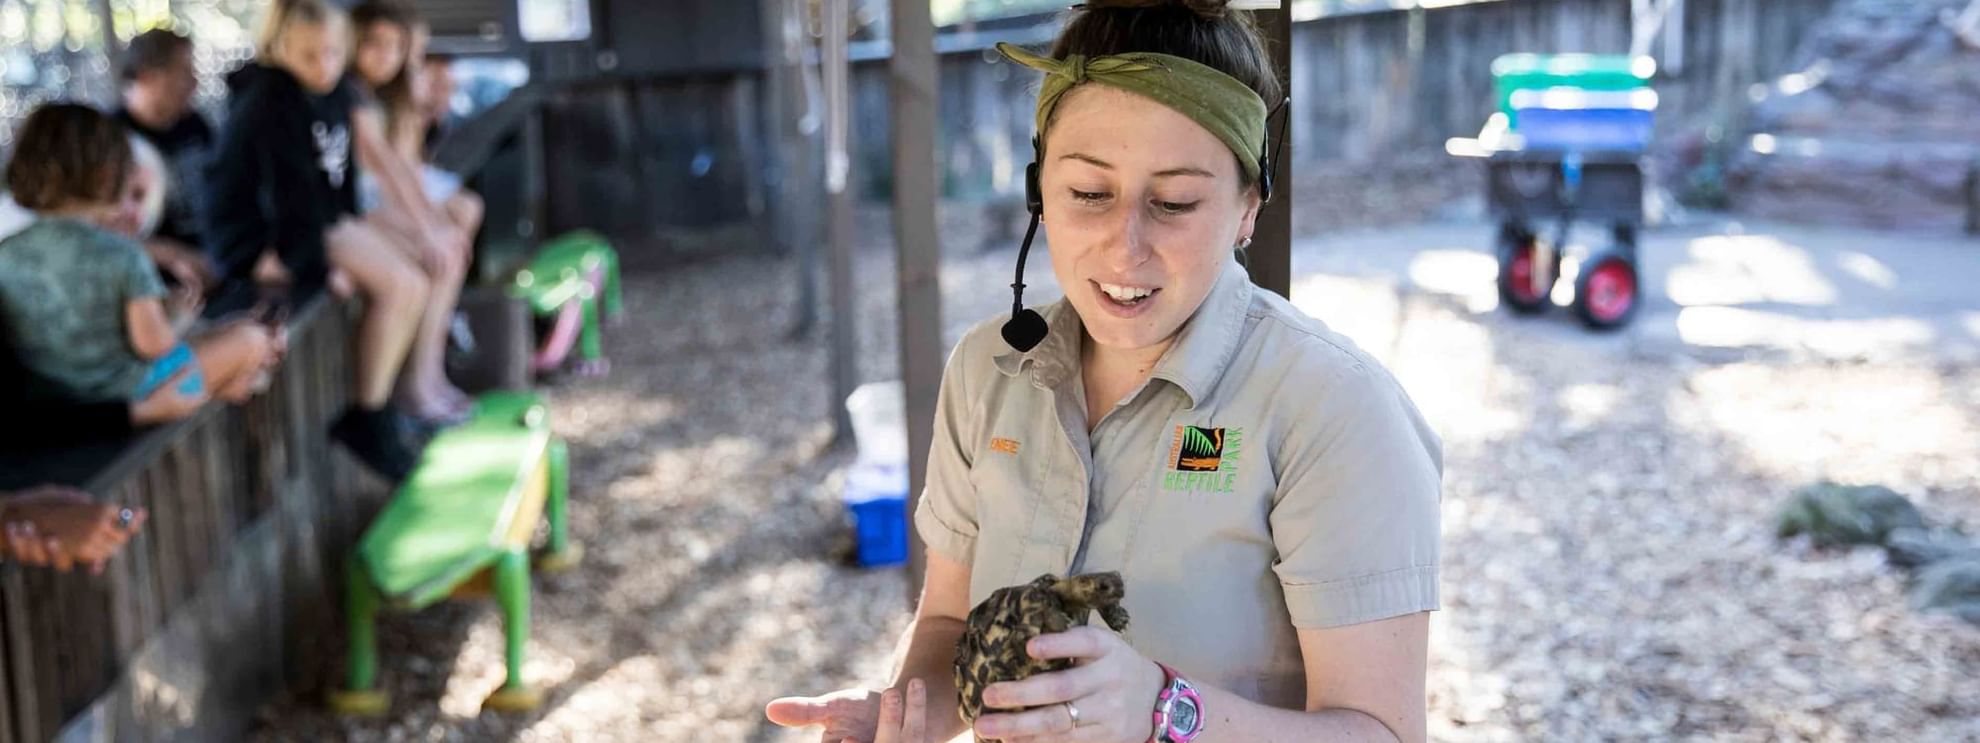 Lady holding turtle at Australian Reptile Park